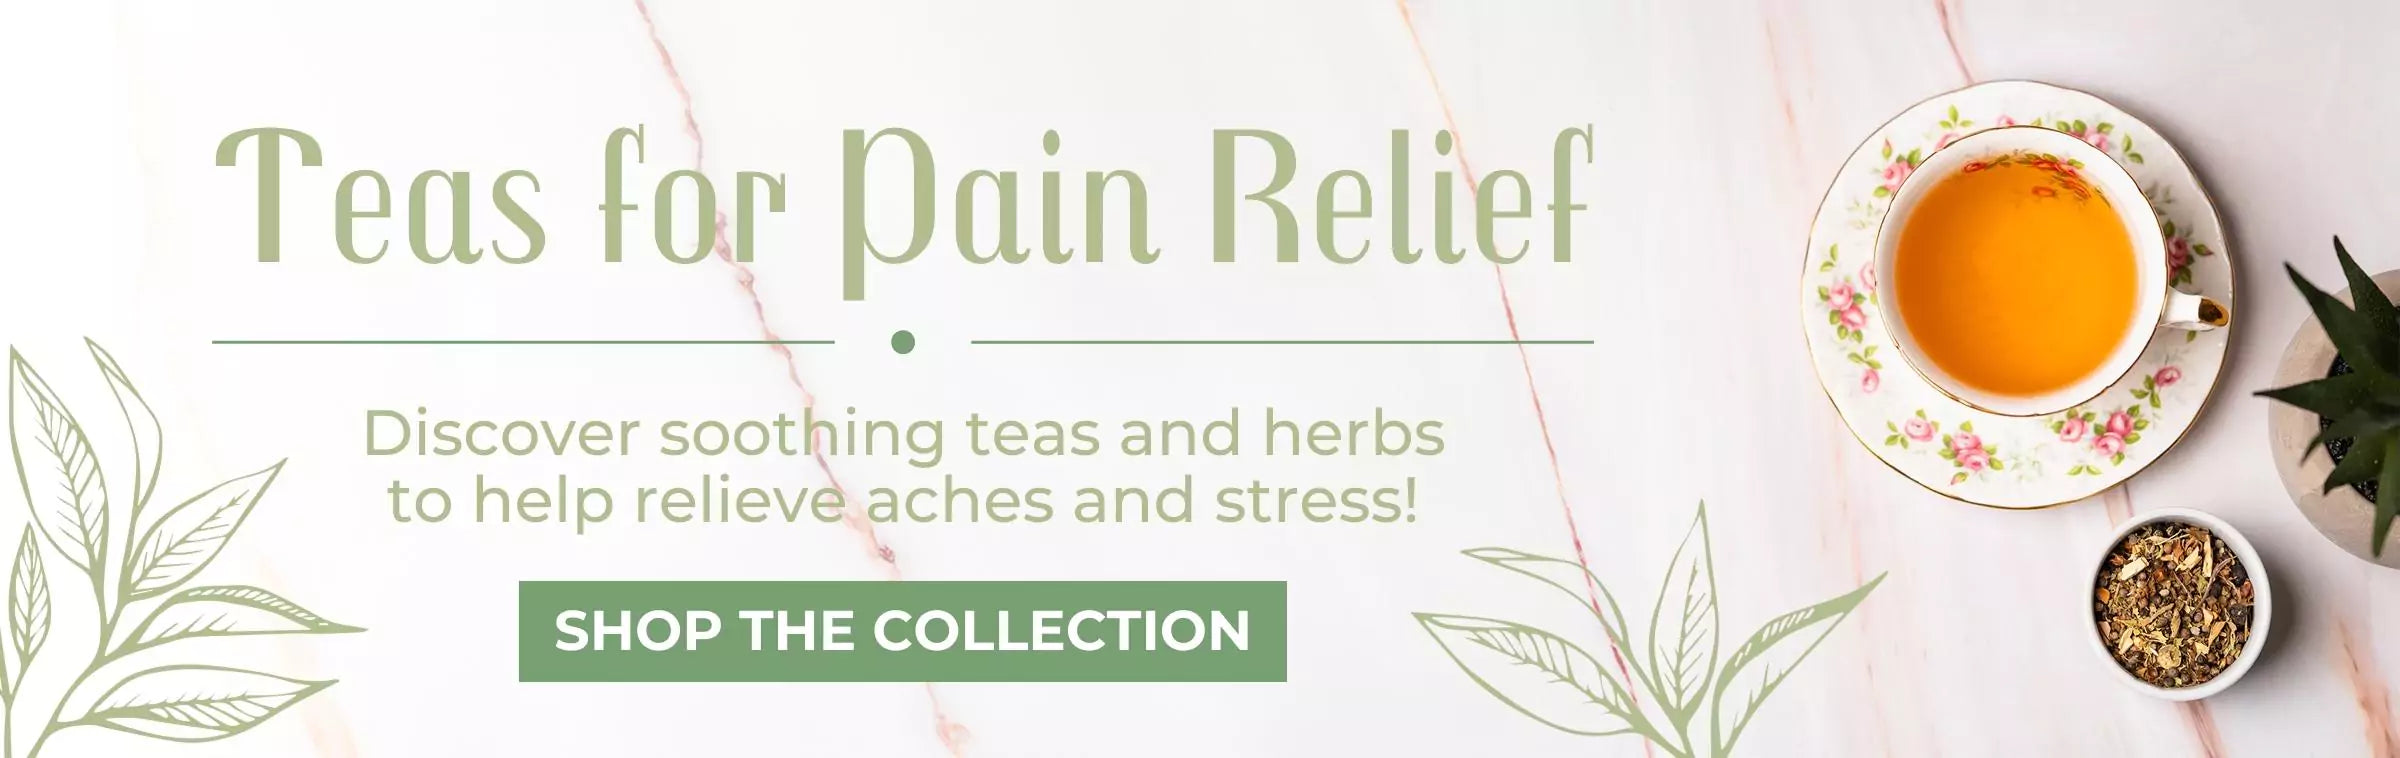 Teas for Pain Relief Banner - Teacup with Tea next to Ingredients